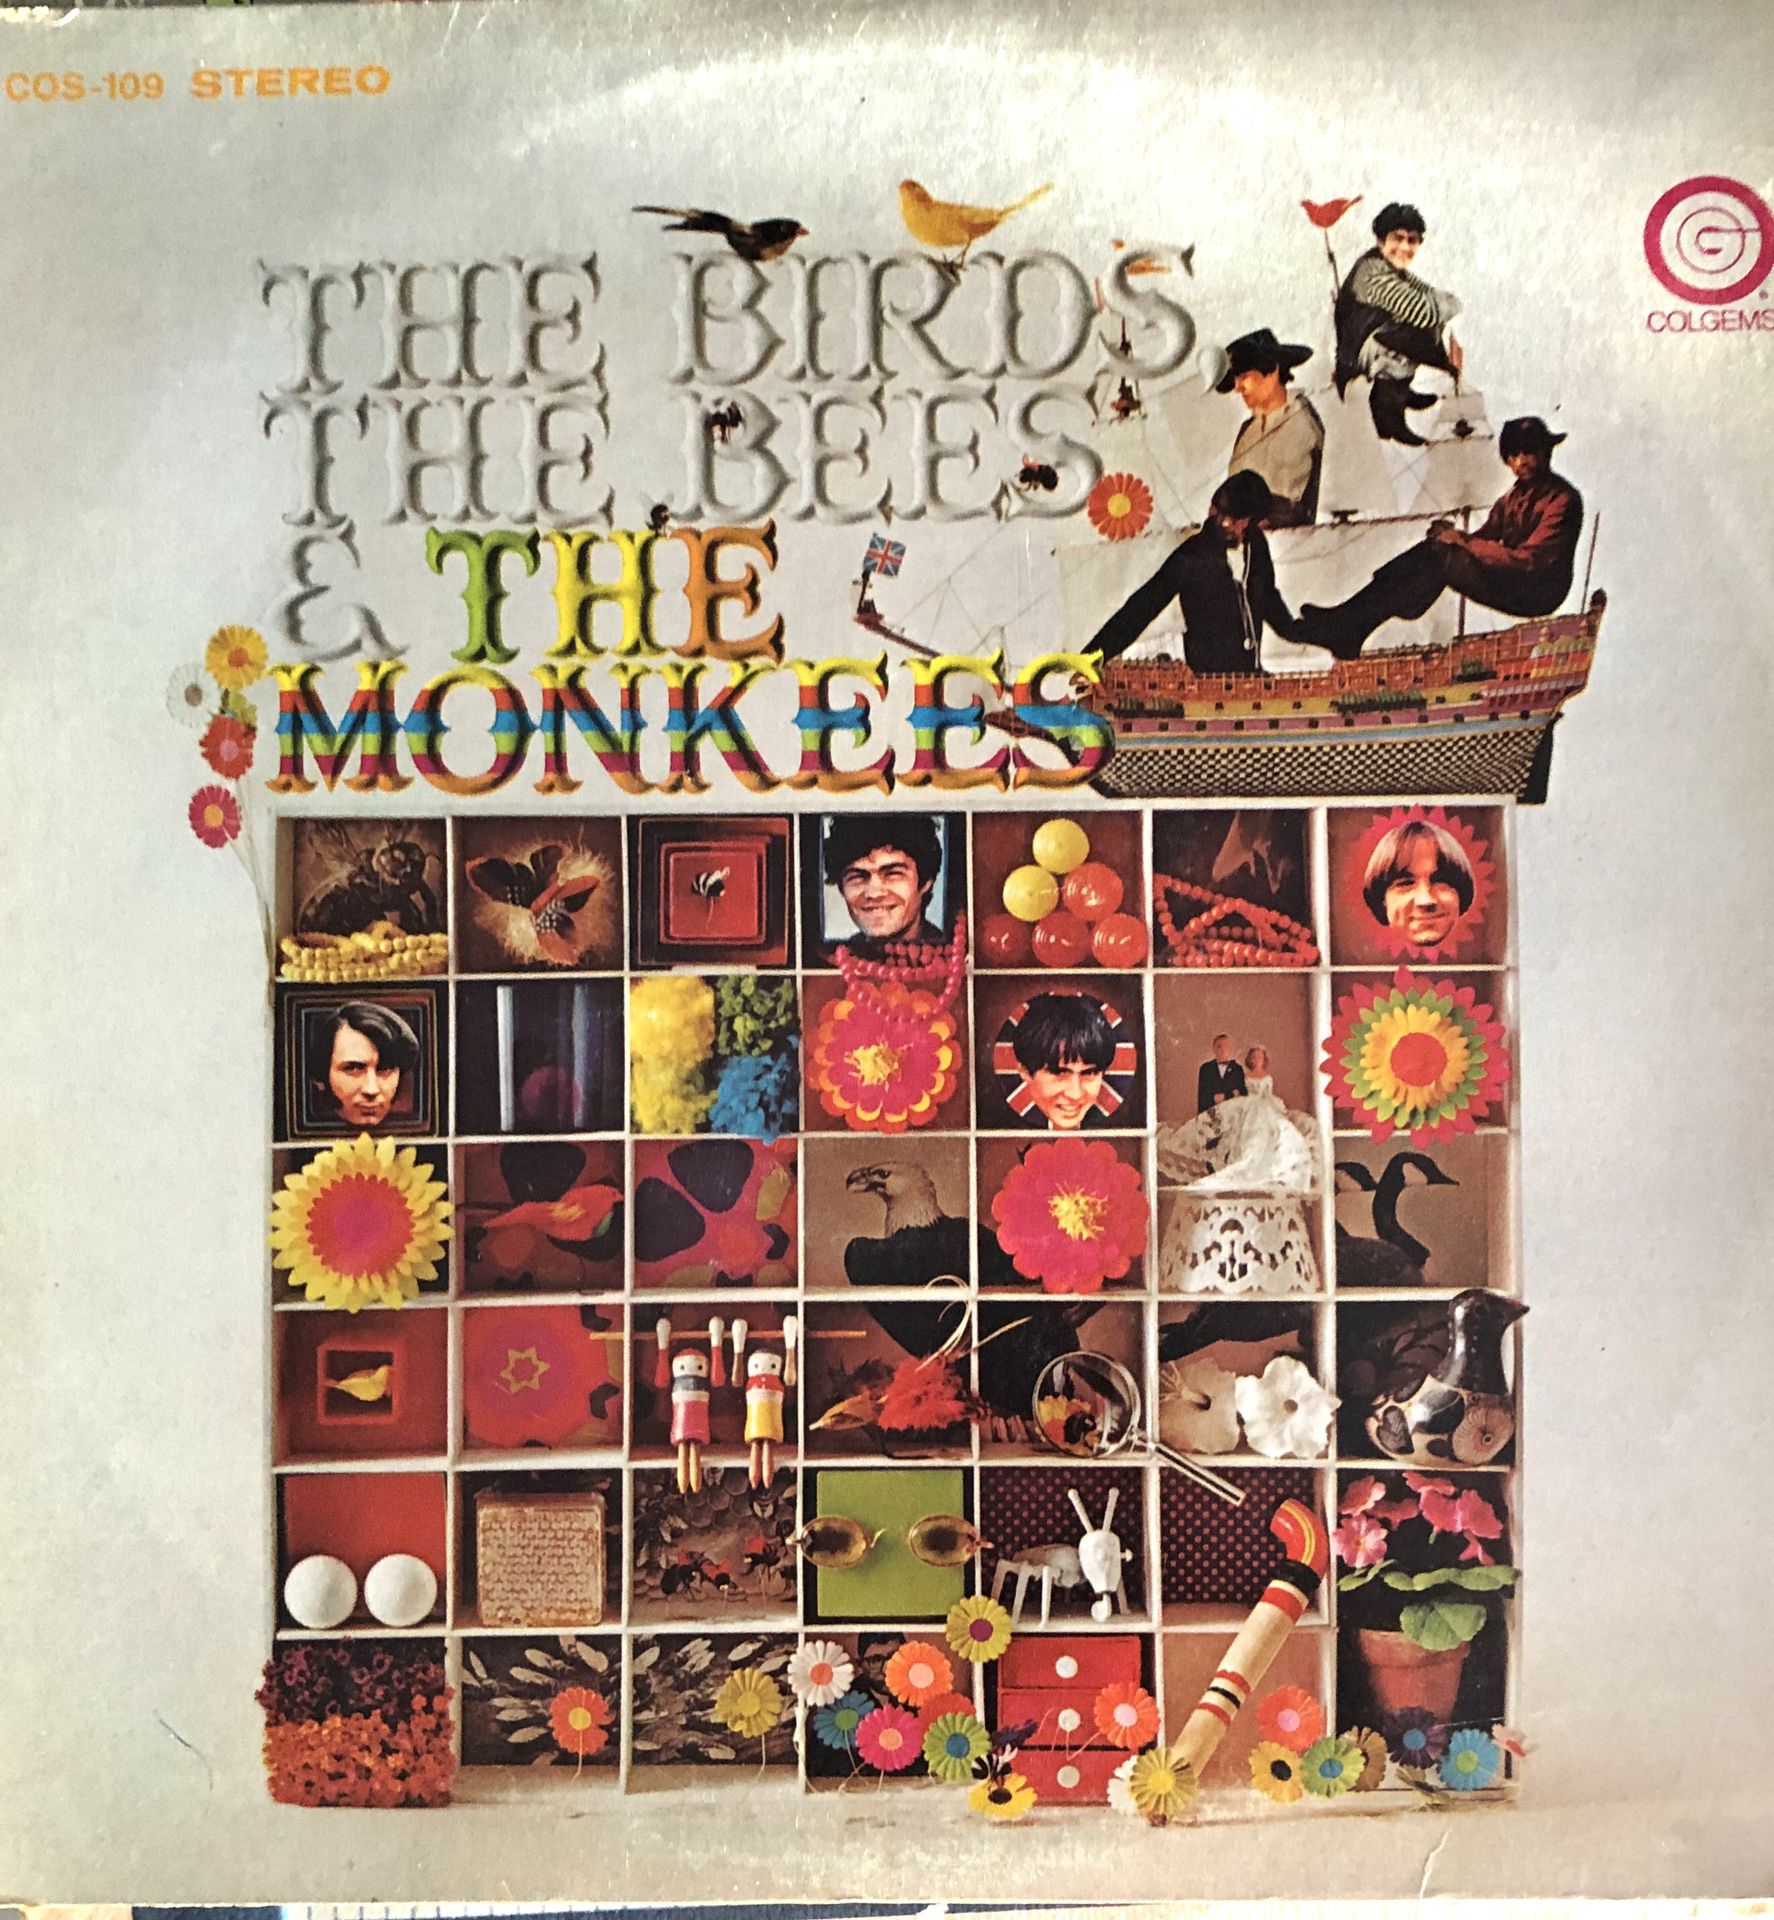 The Monkees ‘ The Birds The Bees The Monkees vintage L P